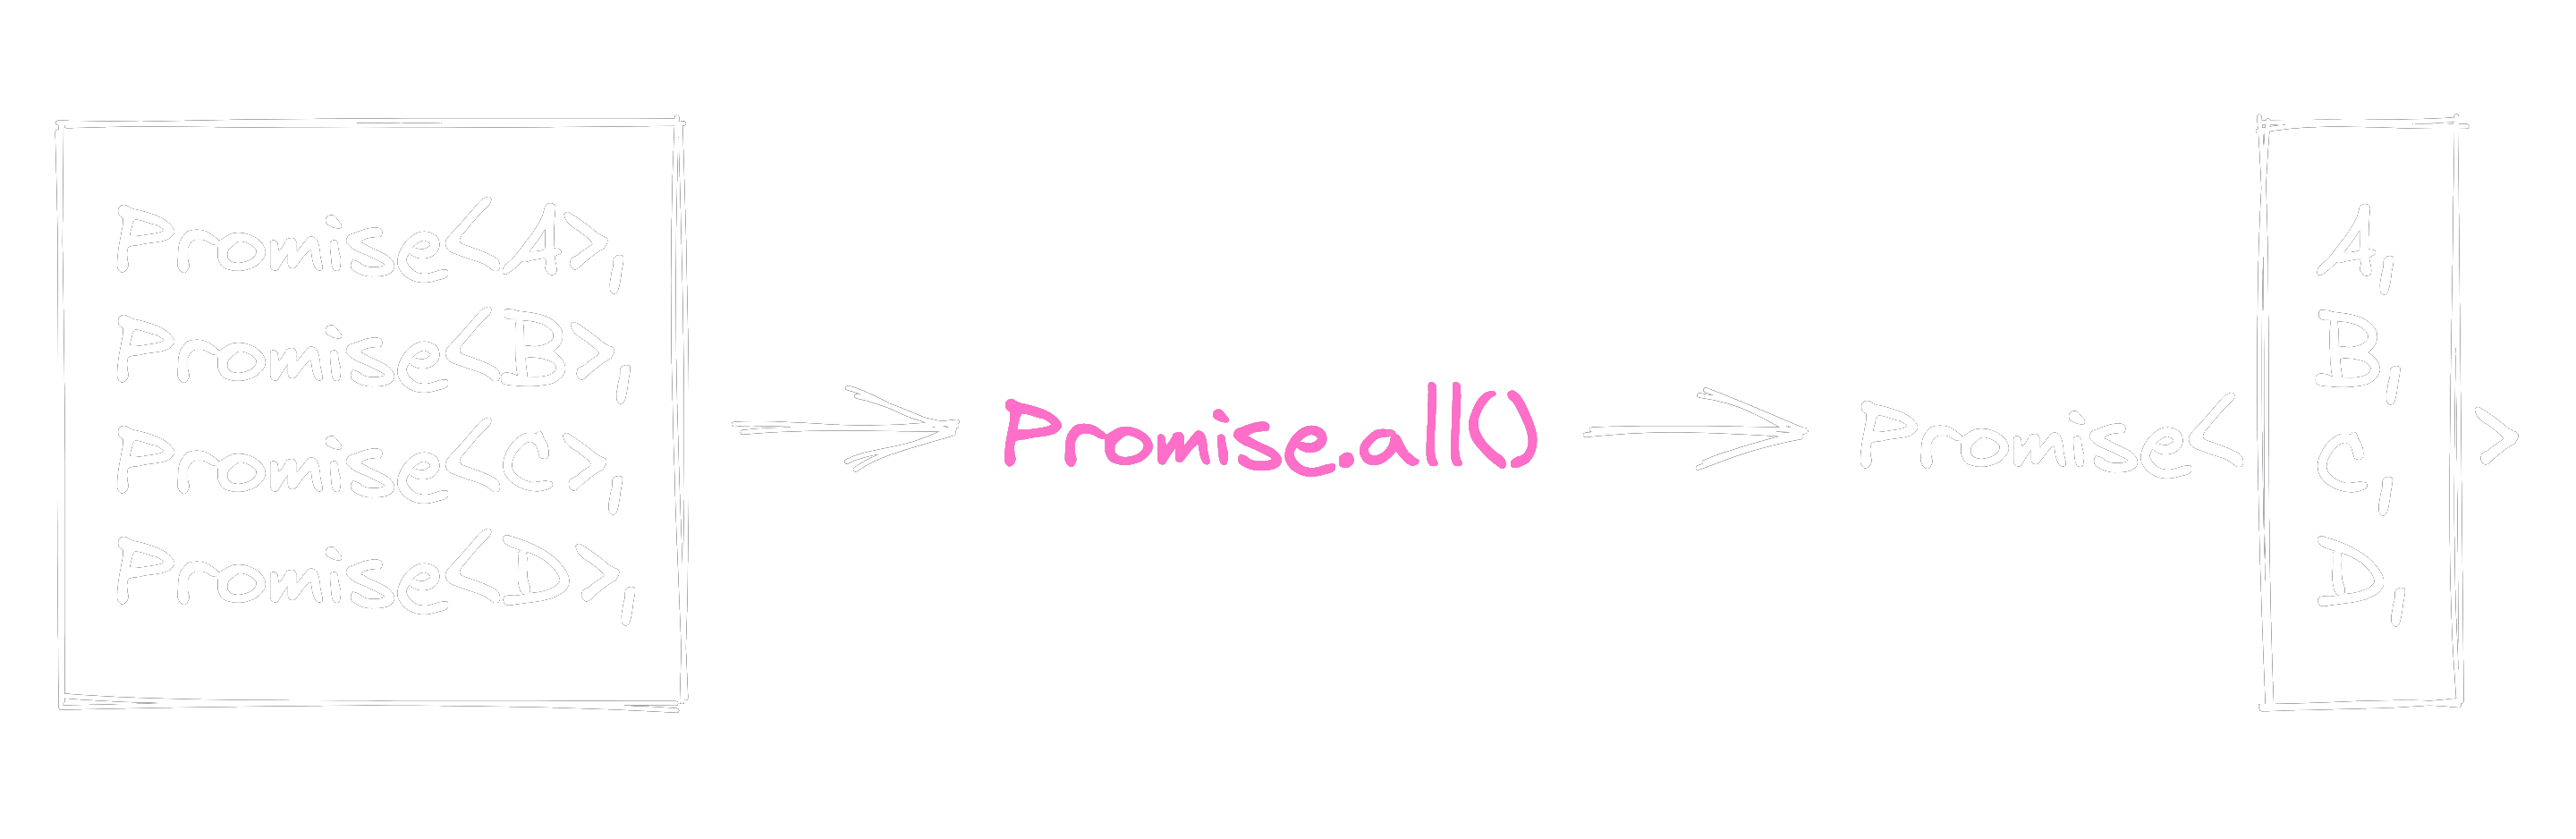 depiction of Promise.all accepting a list of promises and return a promise resolving to the list with results in the order of the provided promises